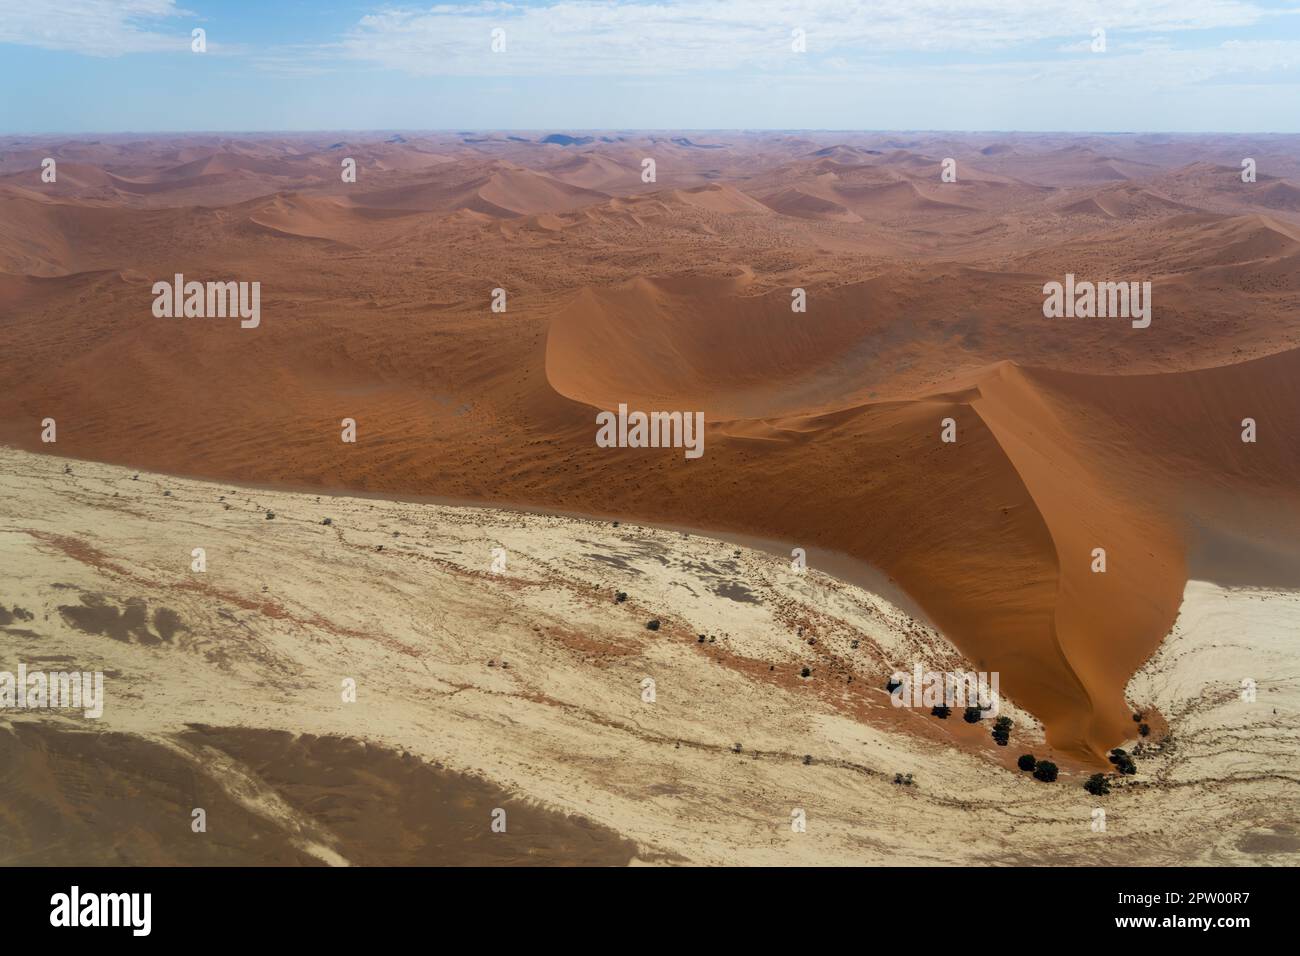 Aerial photograph of the dunes in Namibia Stock Photo